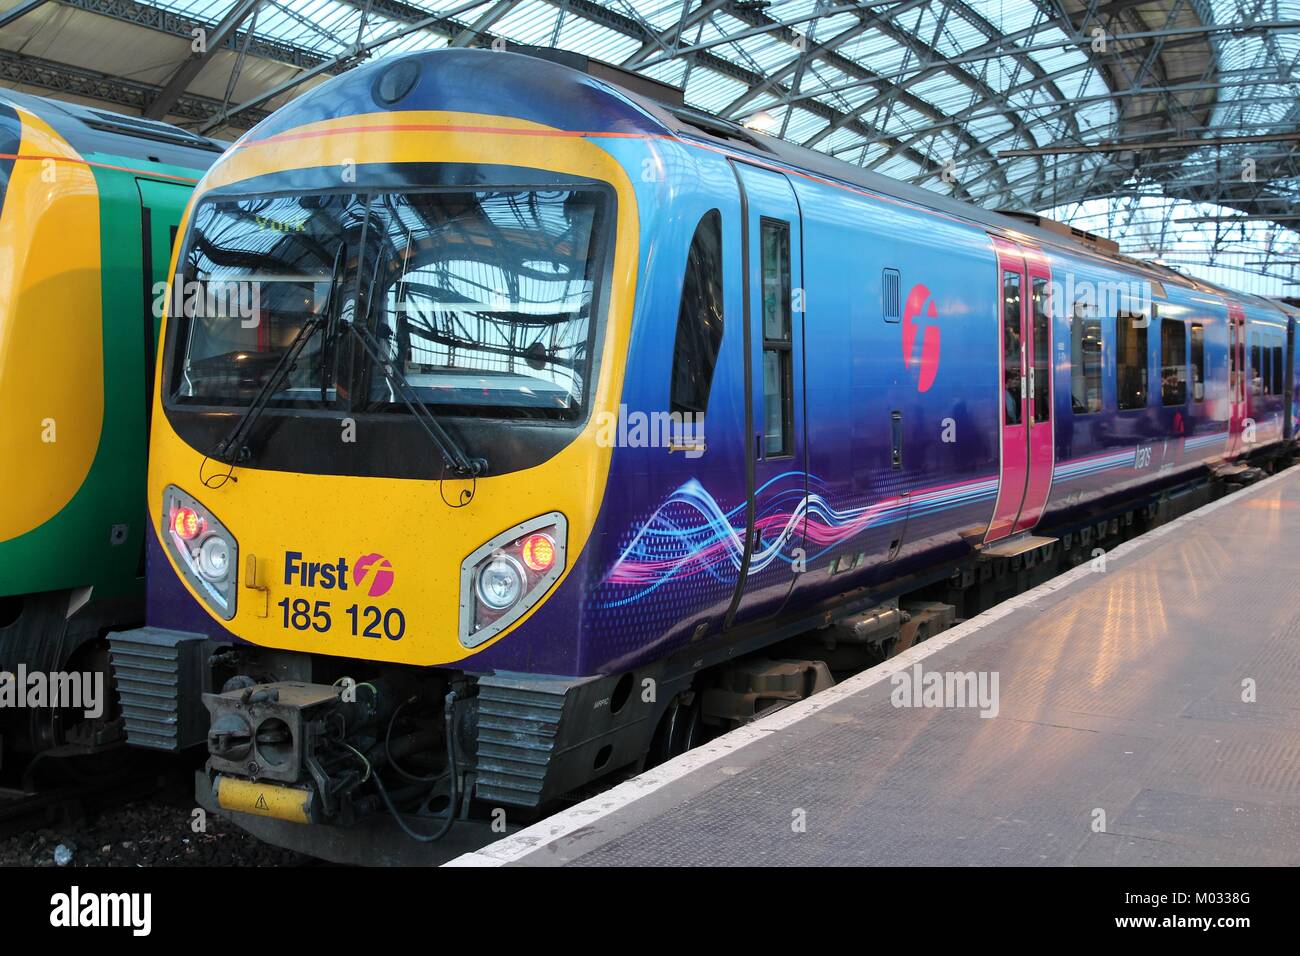 LIVERPOOL, UK - APRIL 20: TransPennine Express train on April 20, 2013 in Liverpool, UK. TransPennine is operated by FirstGroup and Keolis. FirstGroup Stock Photo